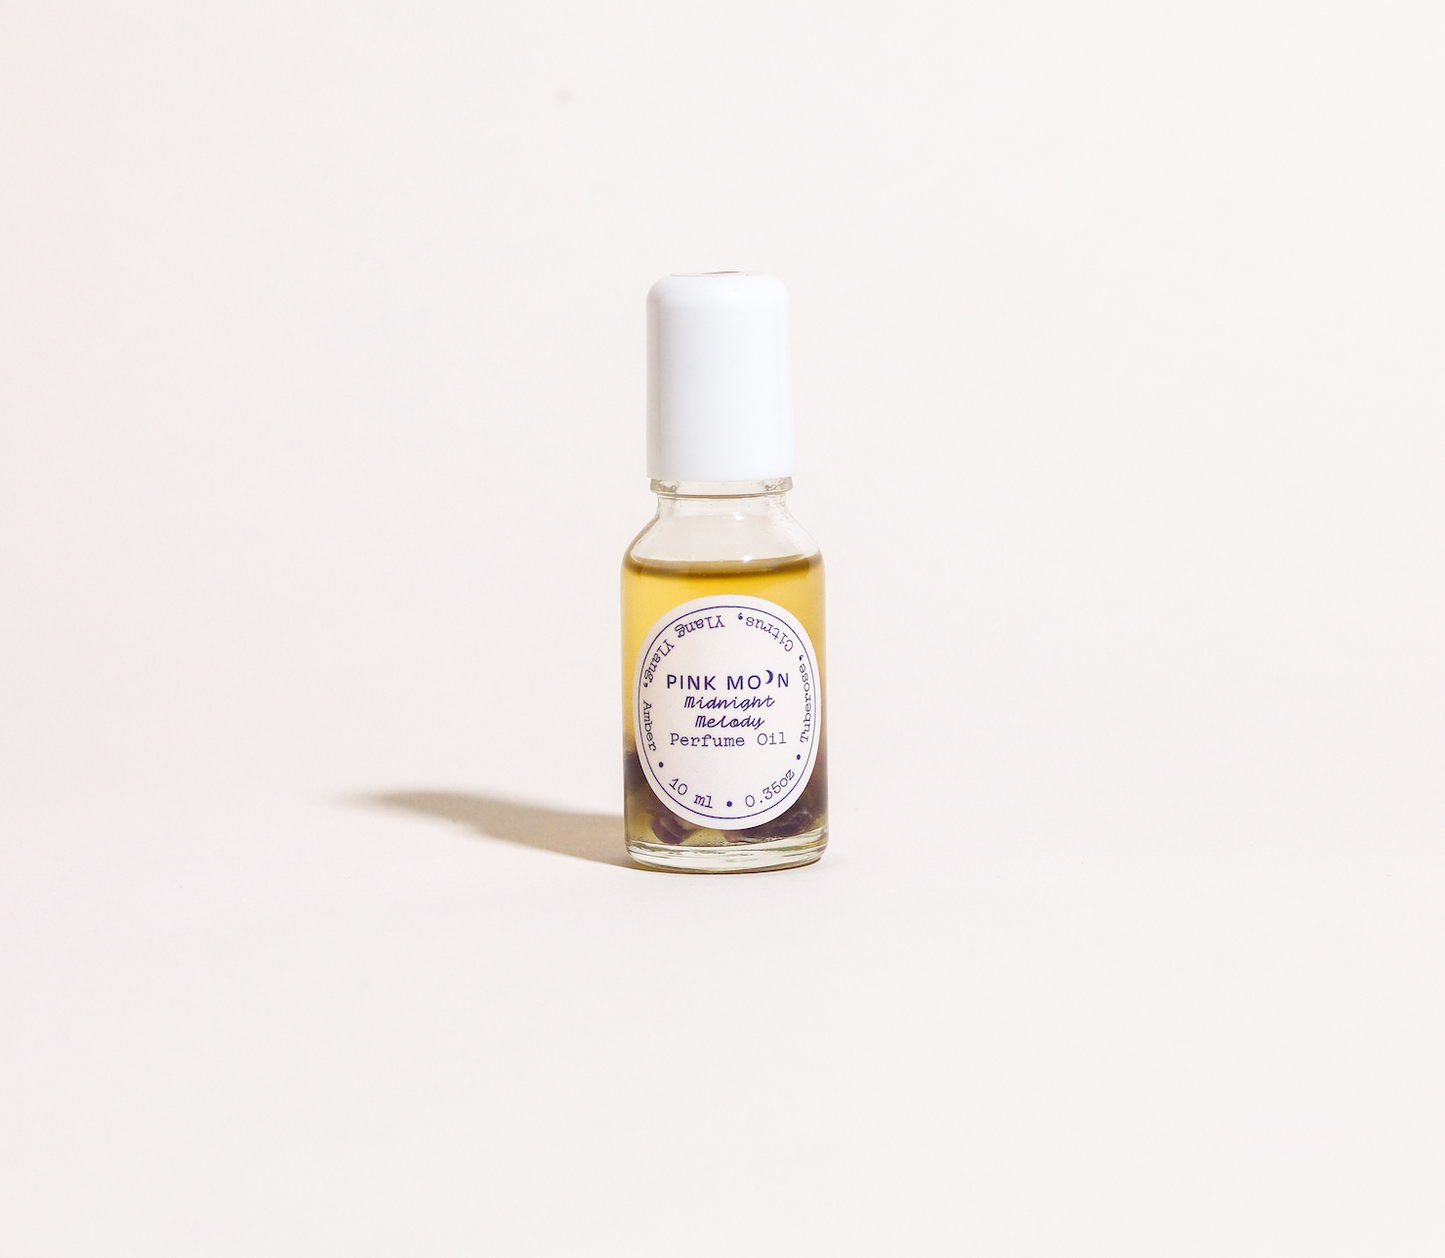 MIDNIGHT MELODY PERFUME OIL BY PINK MOON